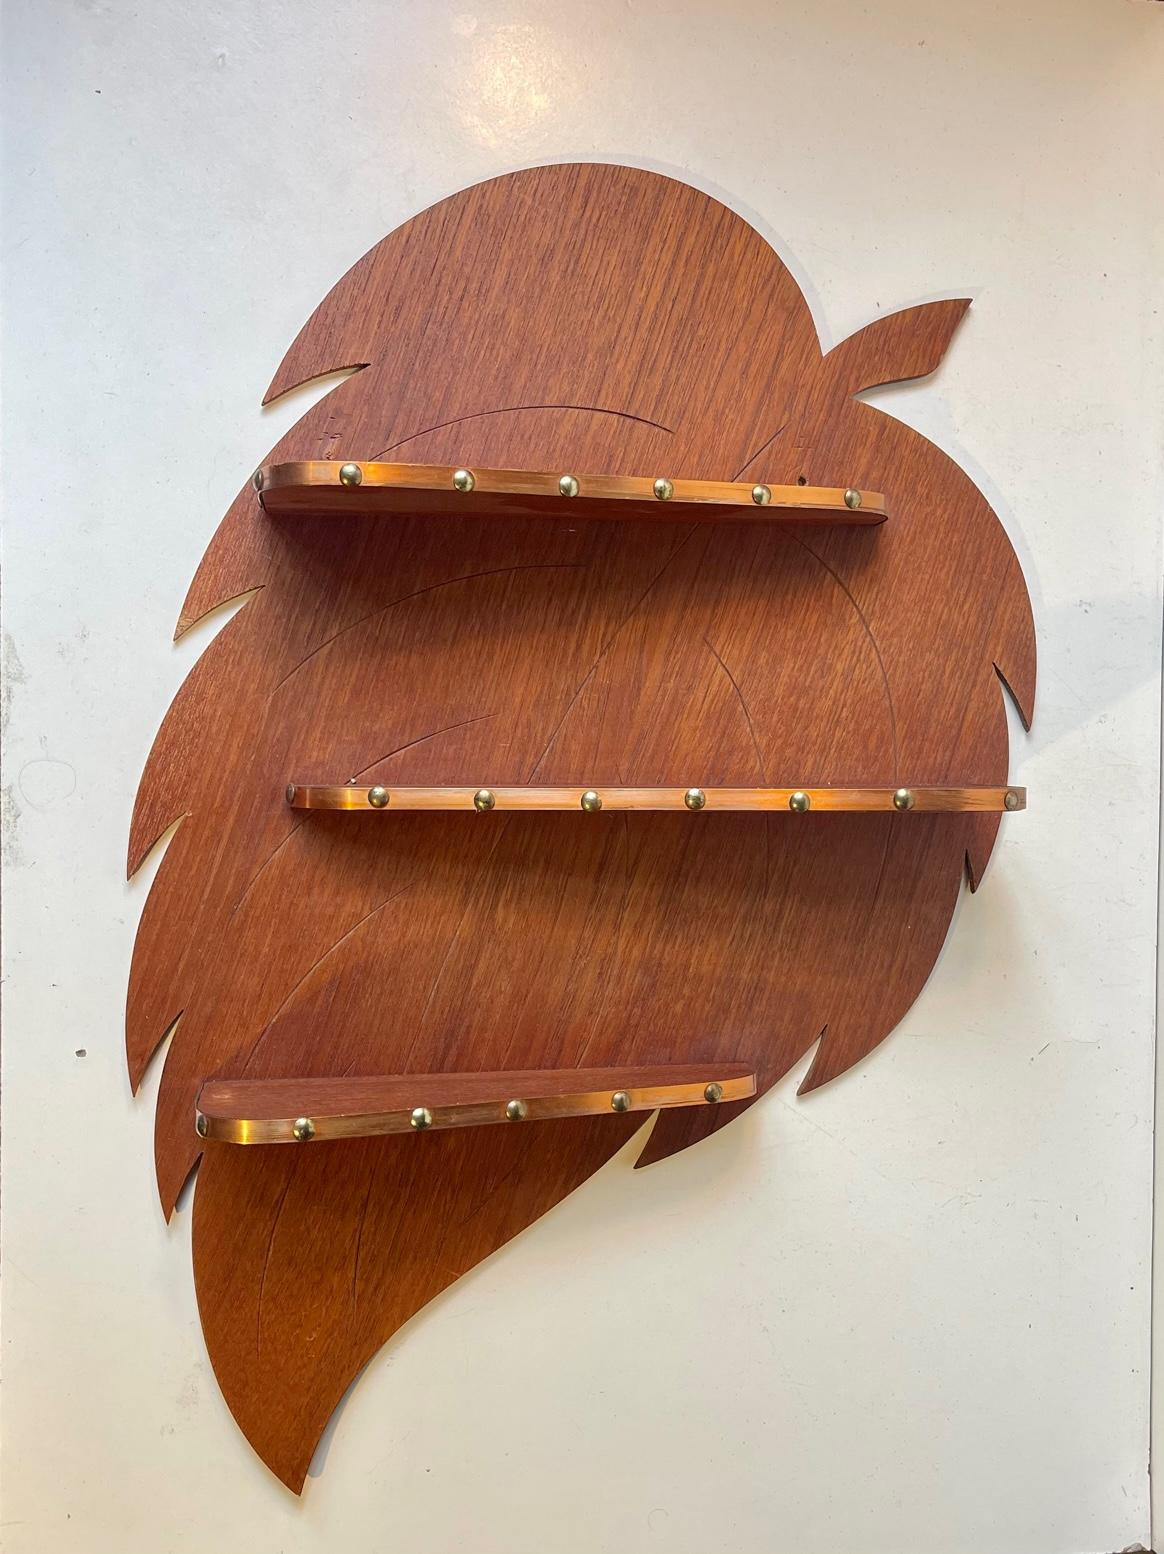 Skillfully crafted wall mounted spice-rack or display-shelf for small items in shape of a giant leaf. The 3 shelves features decor in copper-band set with brass nails. The shelver and back plate is made from teak veneer. Crafted by anonymous